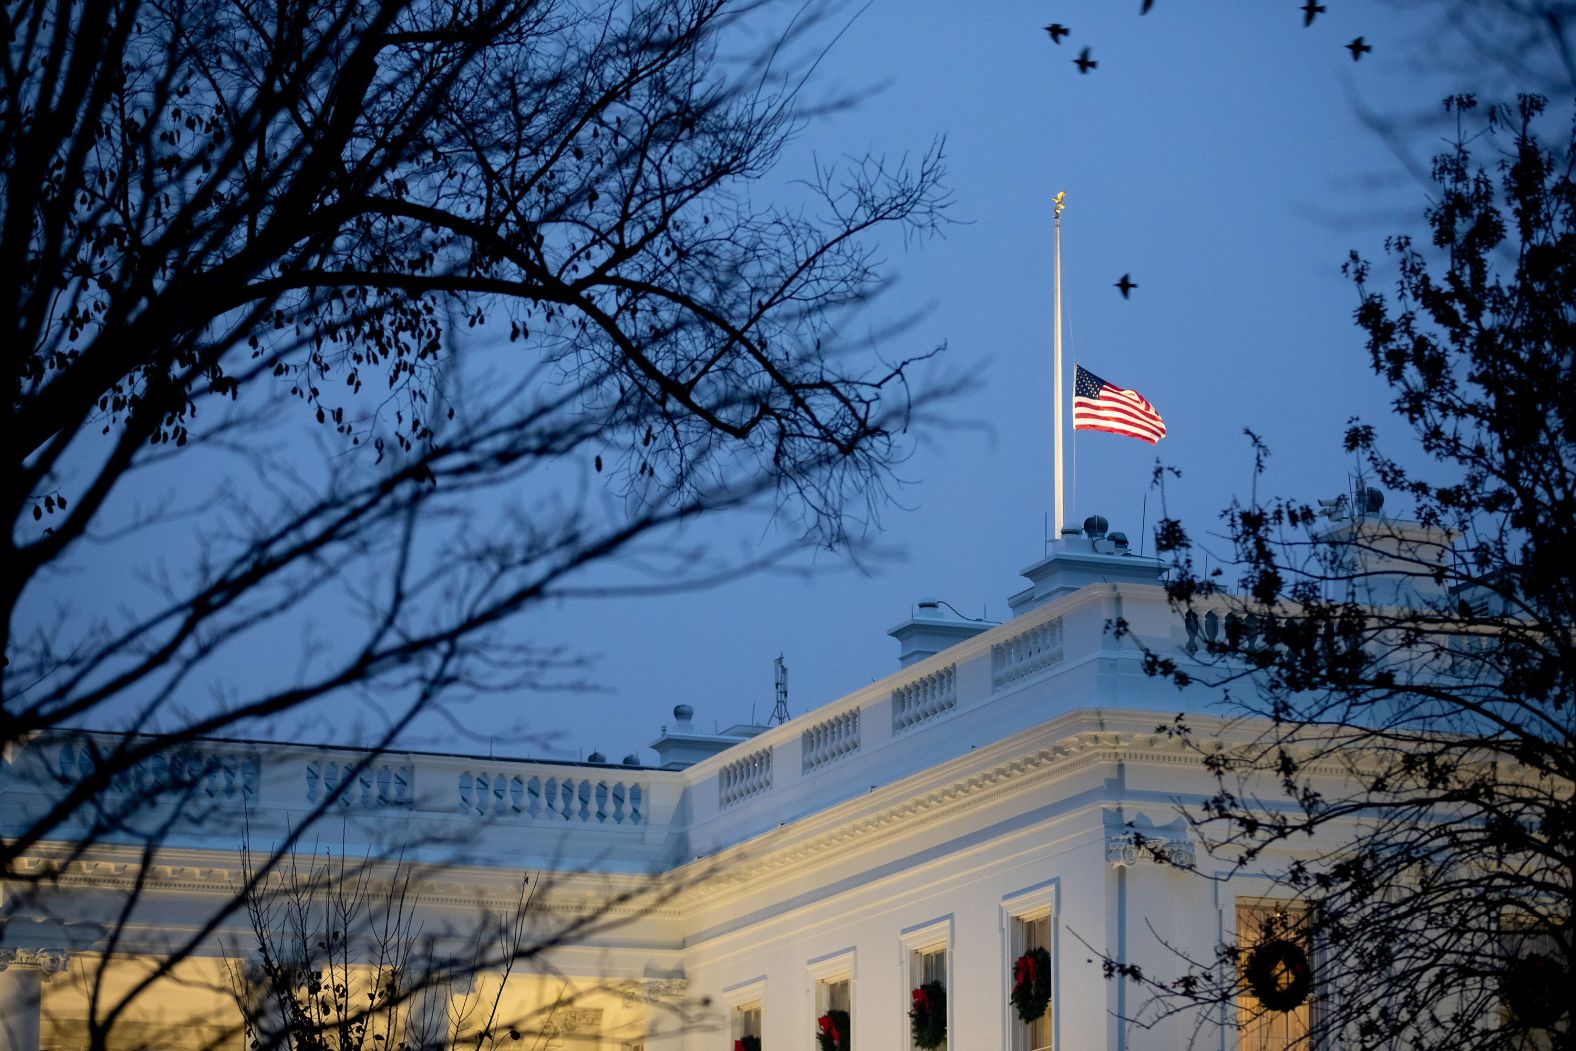 The flag flies at half-staff at the White House on December 1.